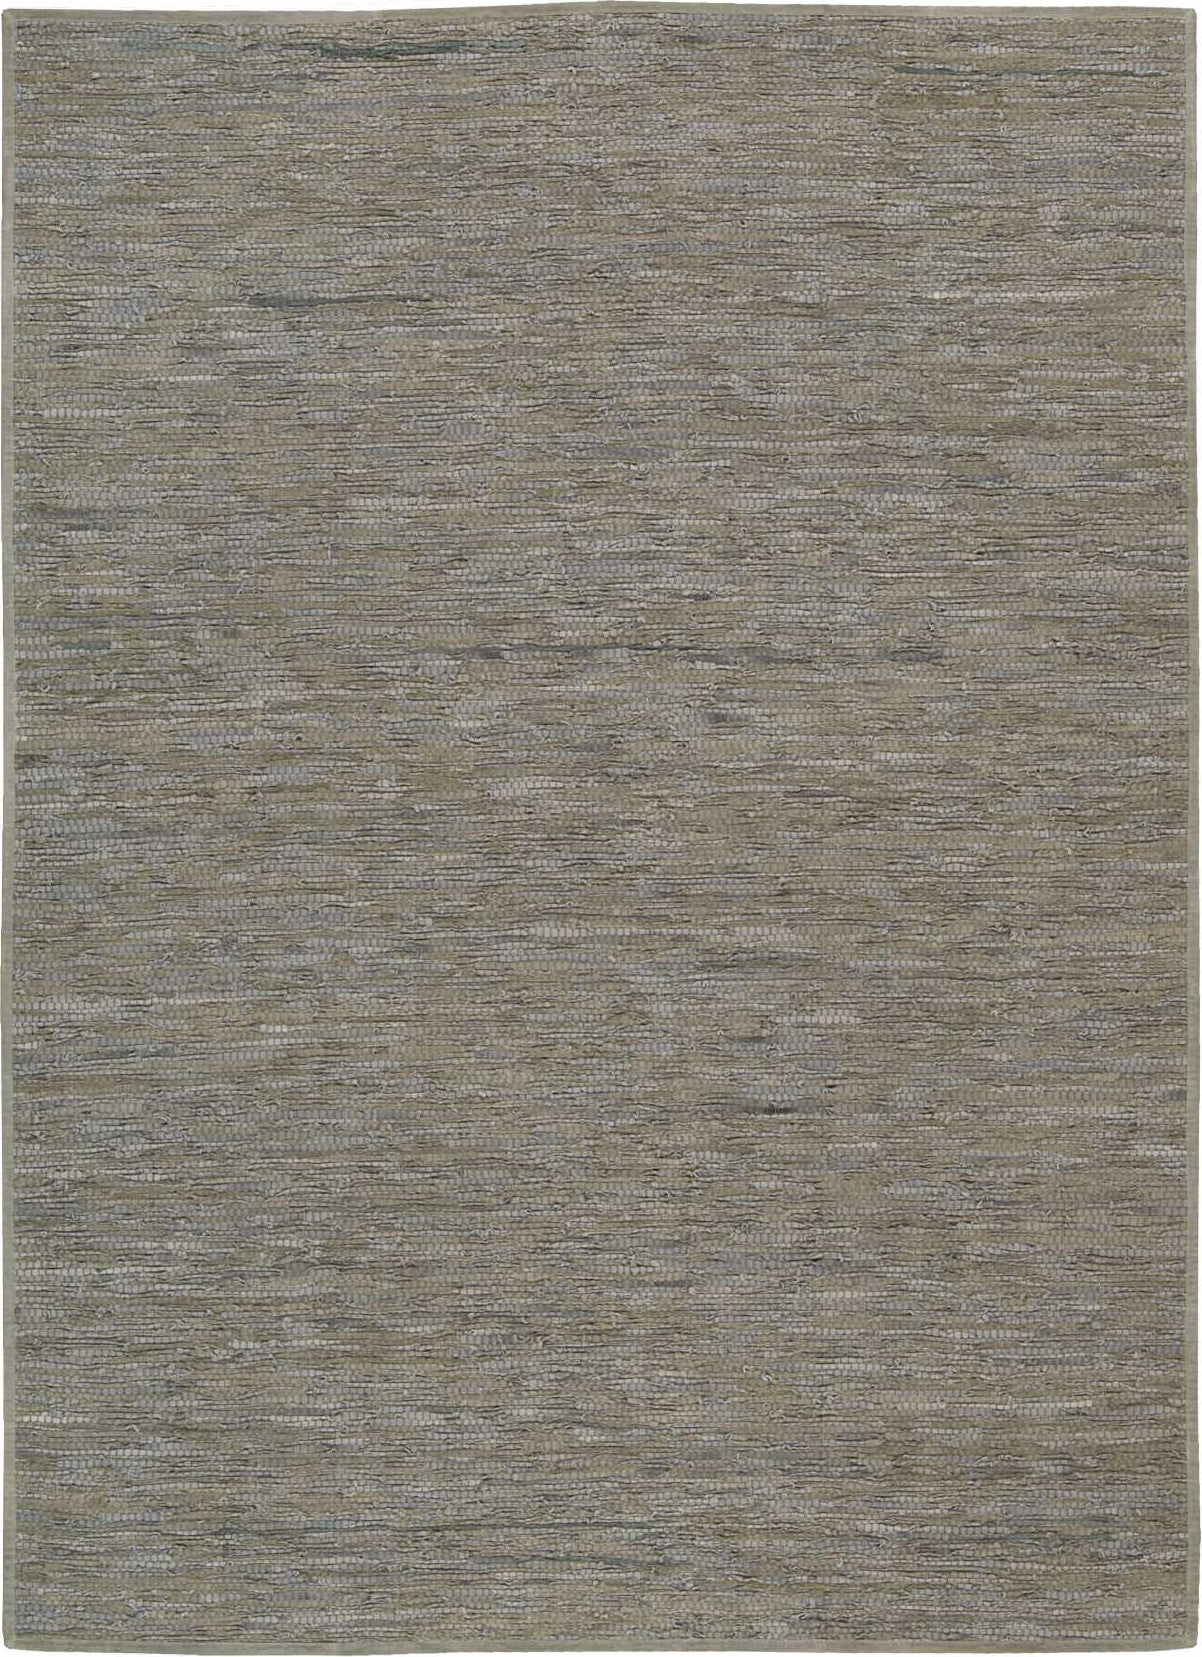 Nourison Stone Laundered SNL01 Area Rug by Joseph Abboud main image